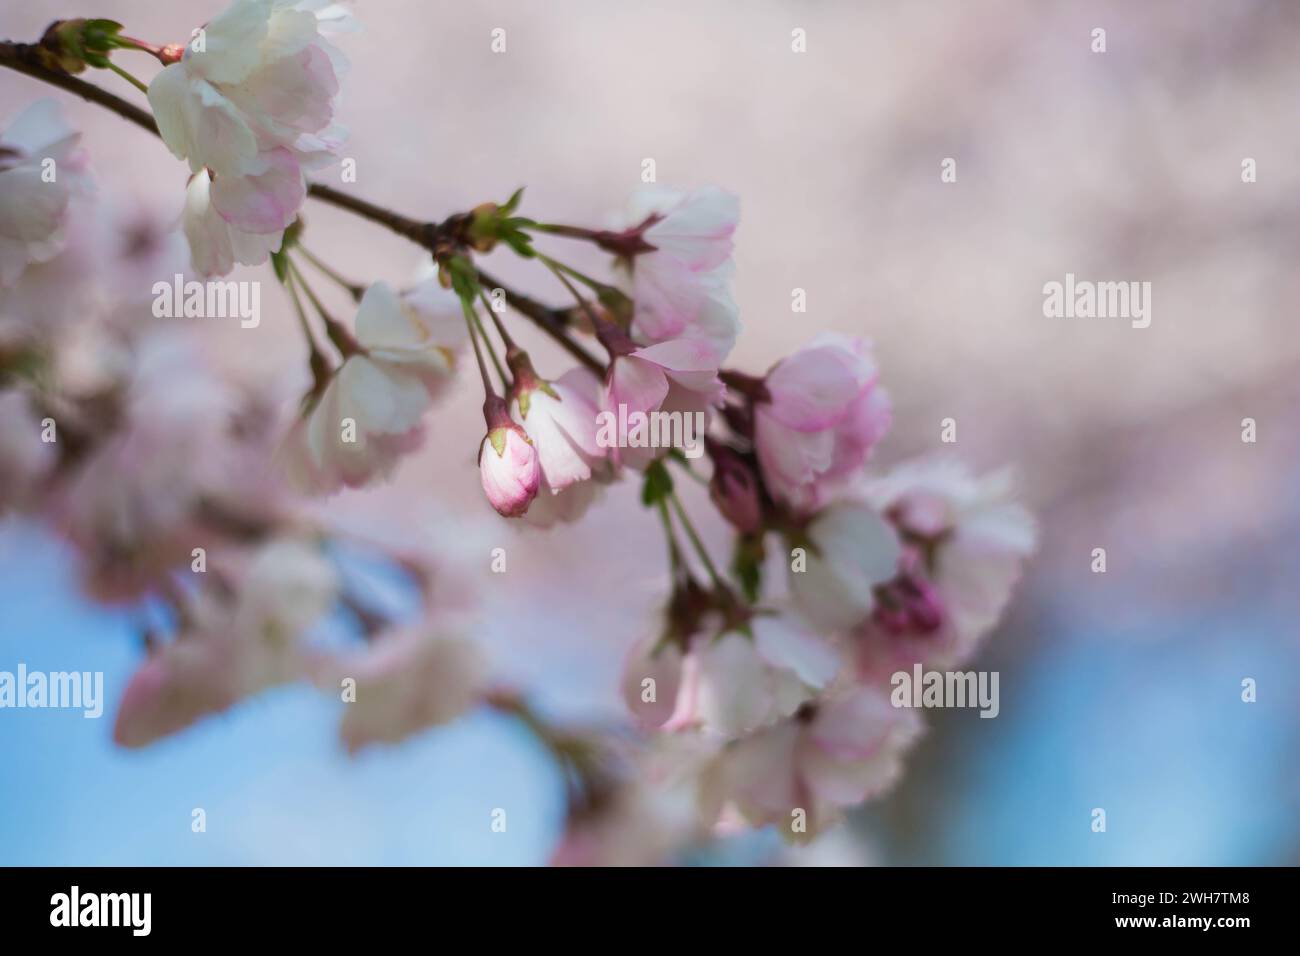 Pink and blue soft blurred flower background, wild cherry blossom (sakura) for spring background .selective focus Stock Photo